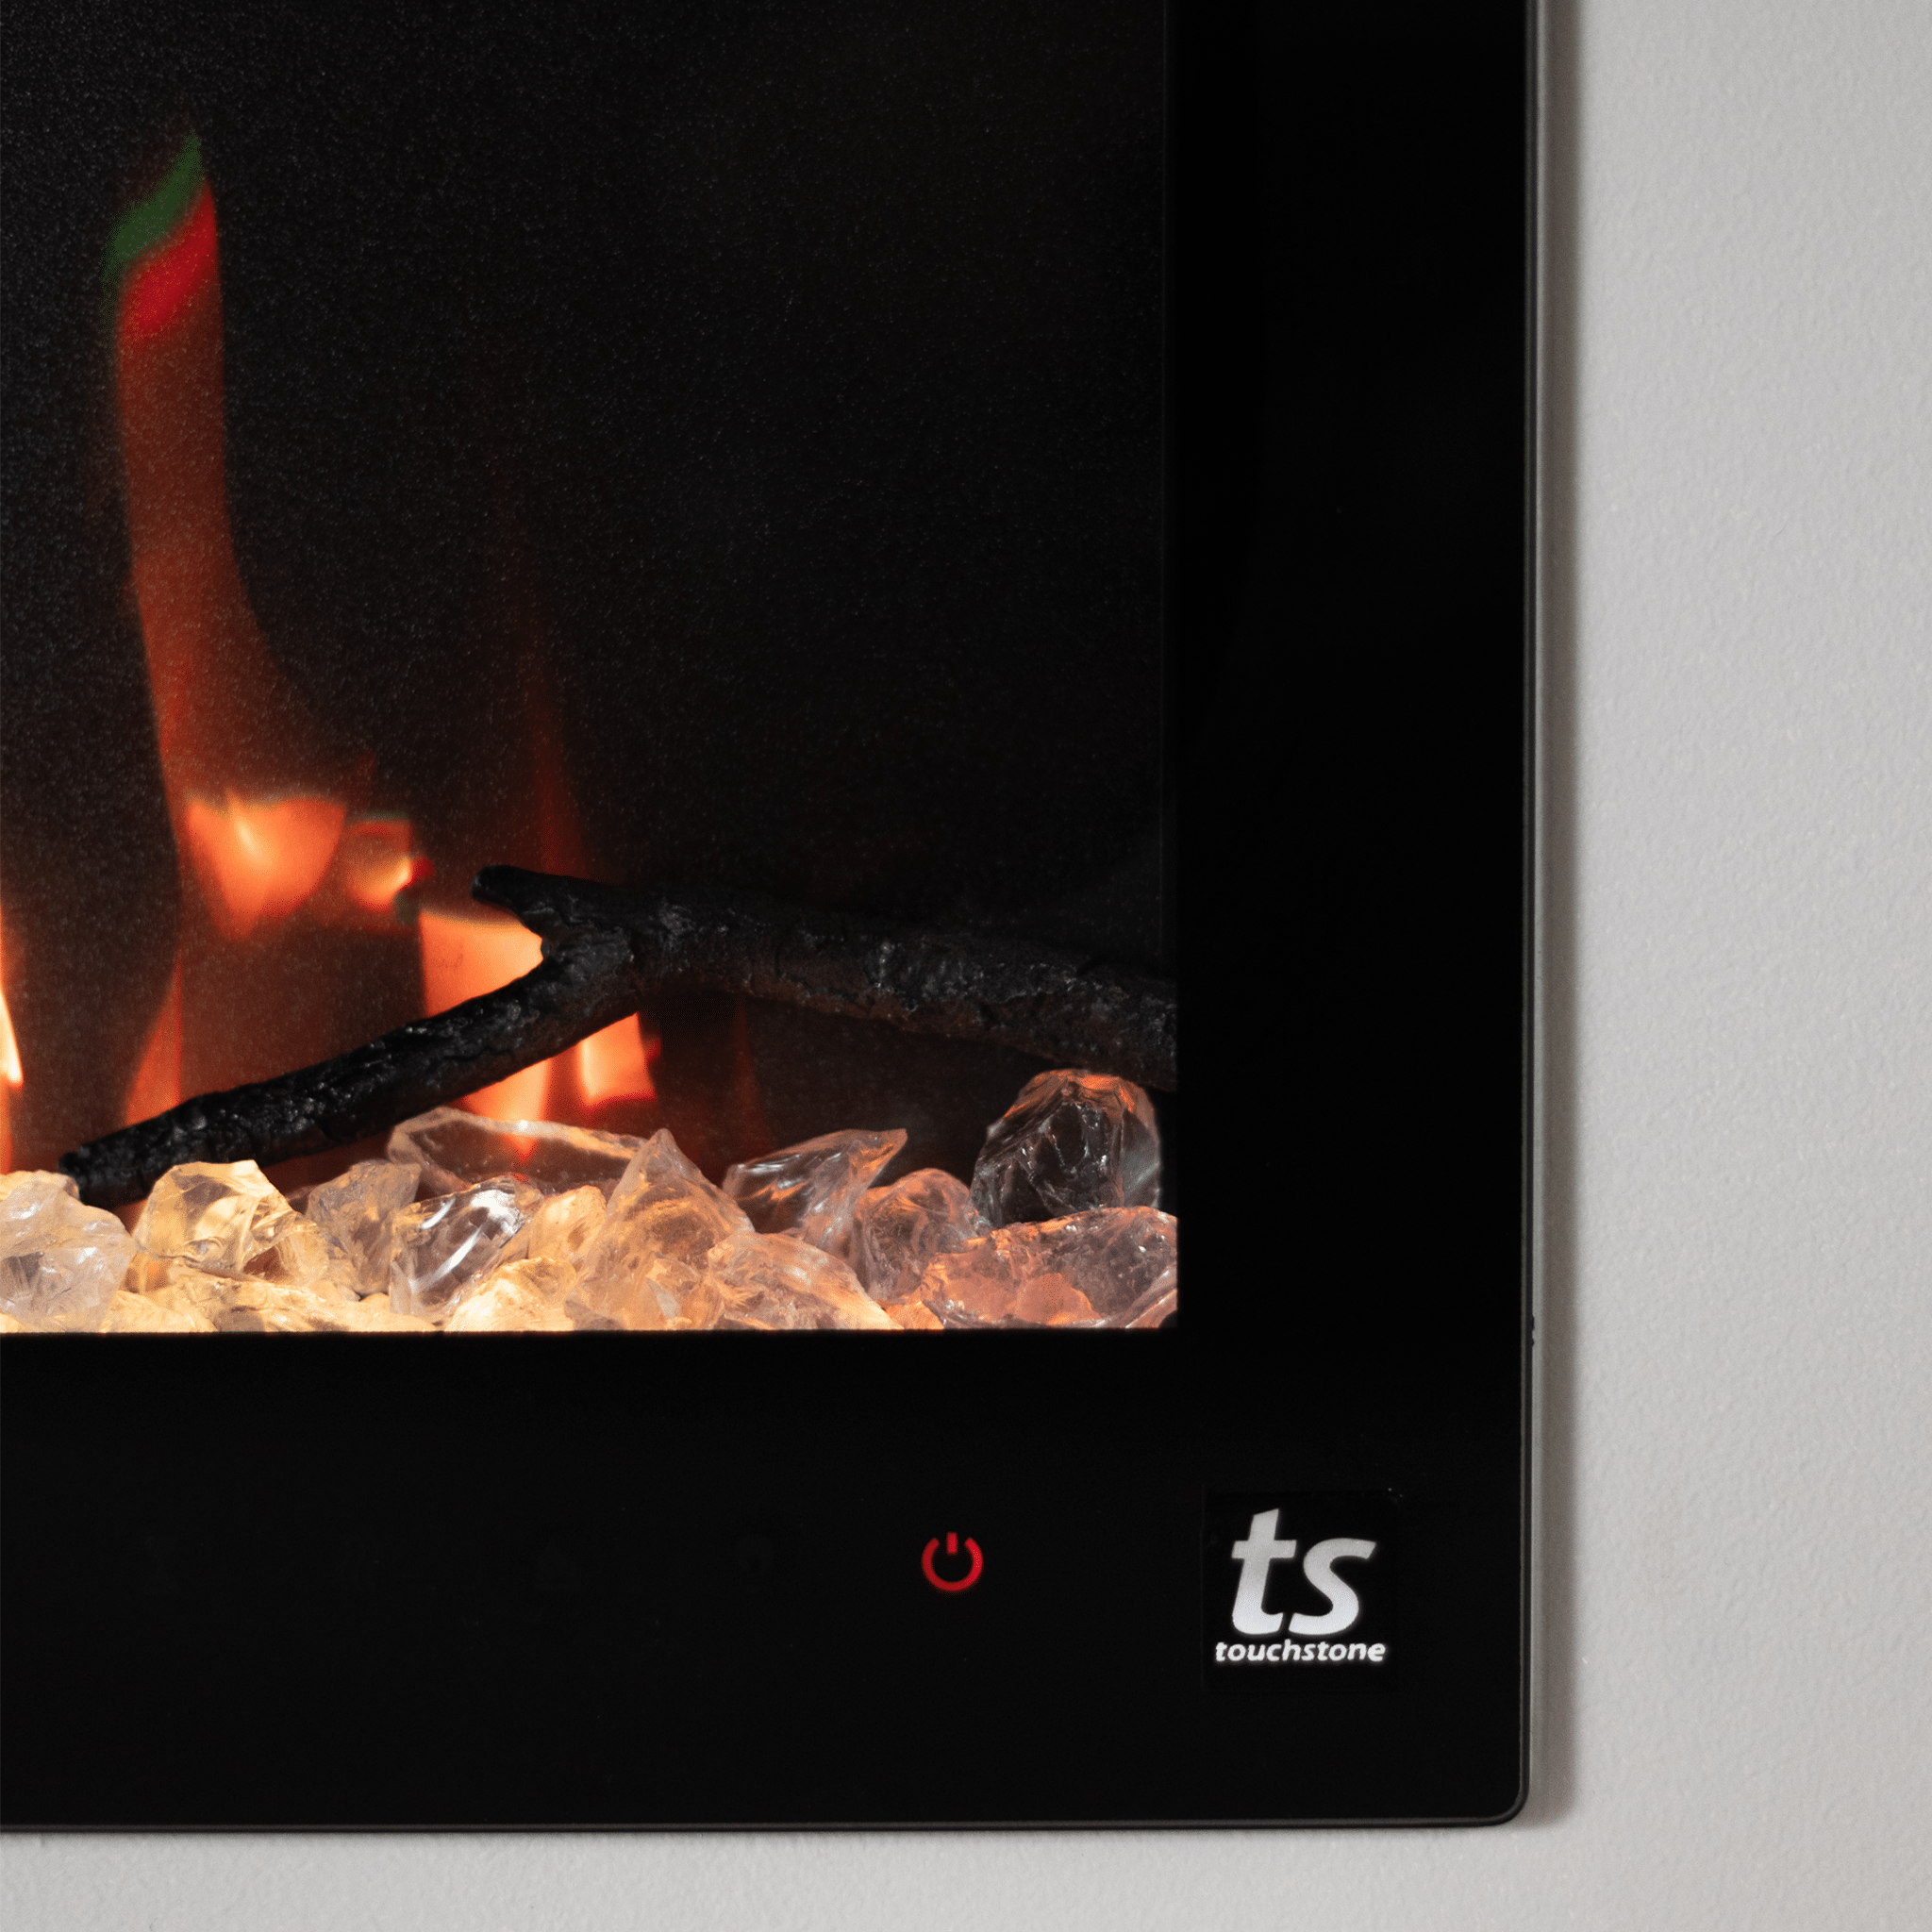 The Sideline Fury 50 Inch Recessed Smart Electric Fireplace 80054 detail shot